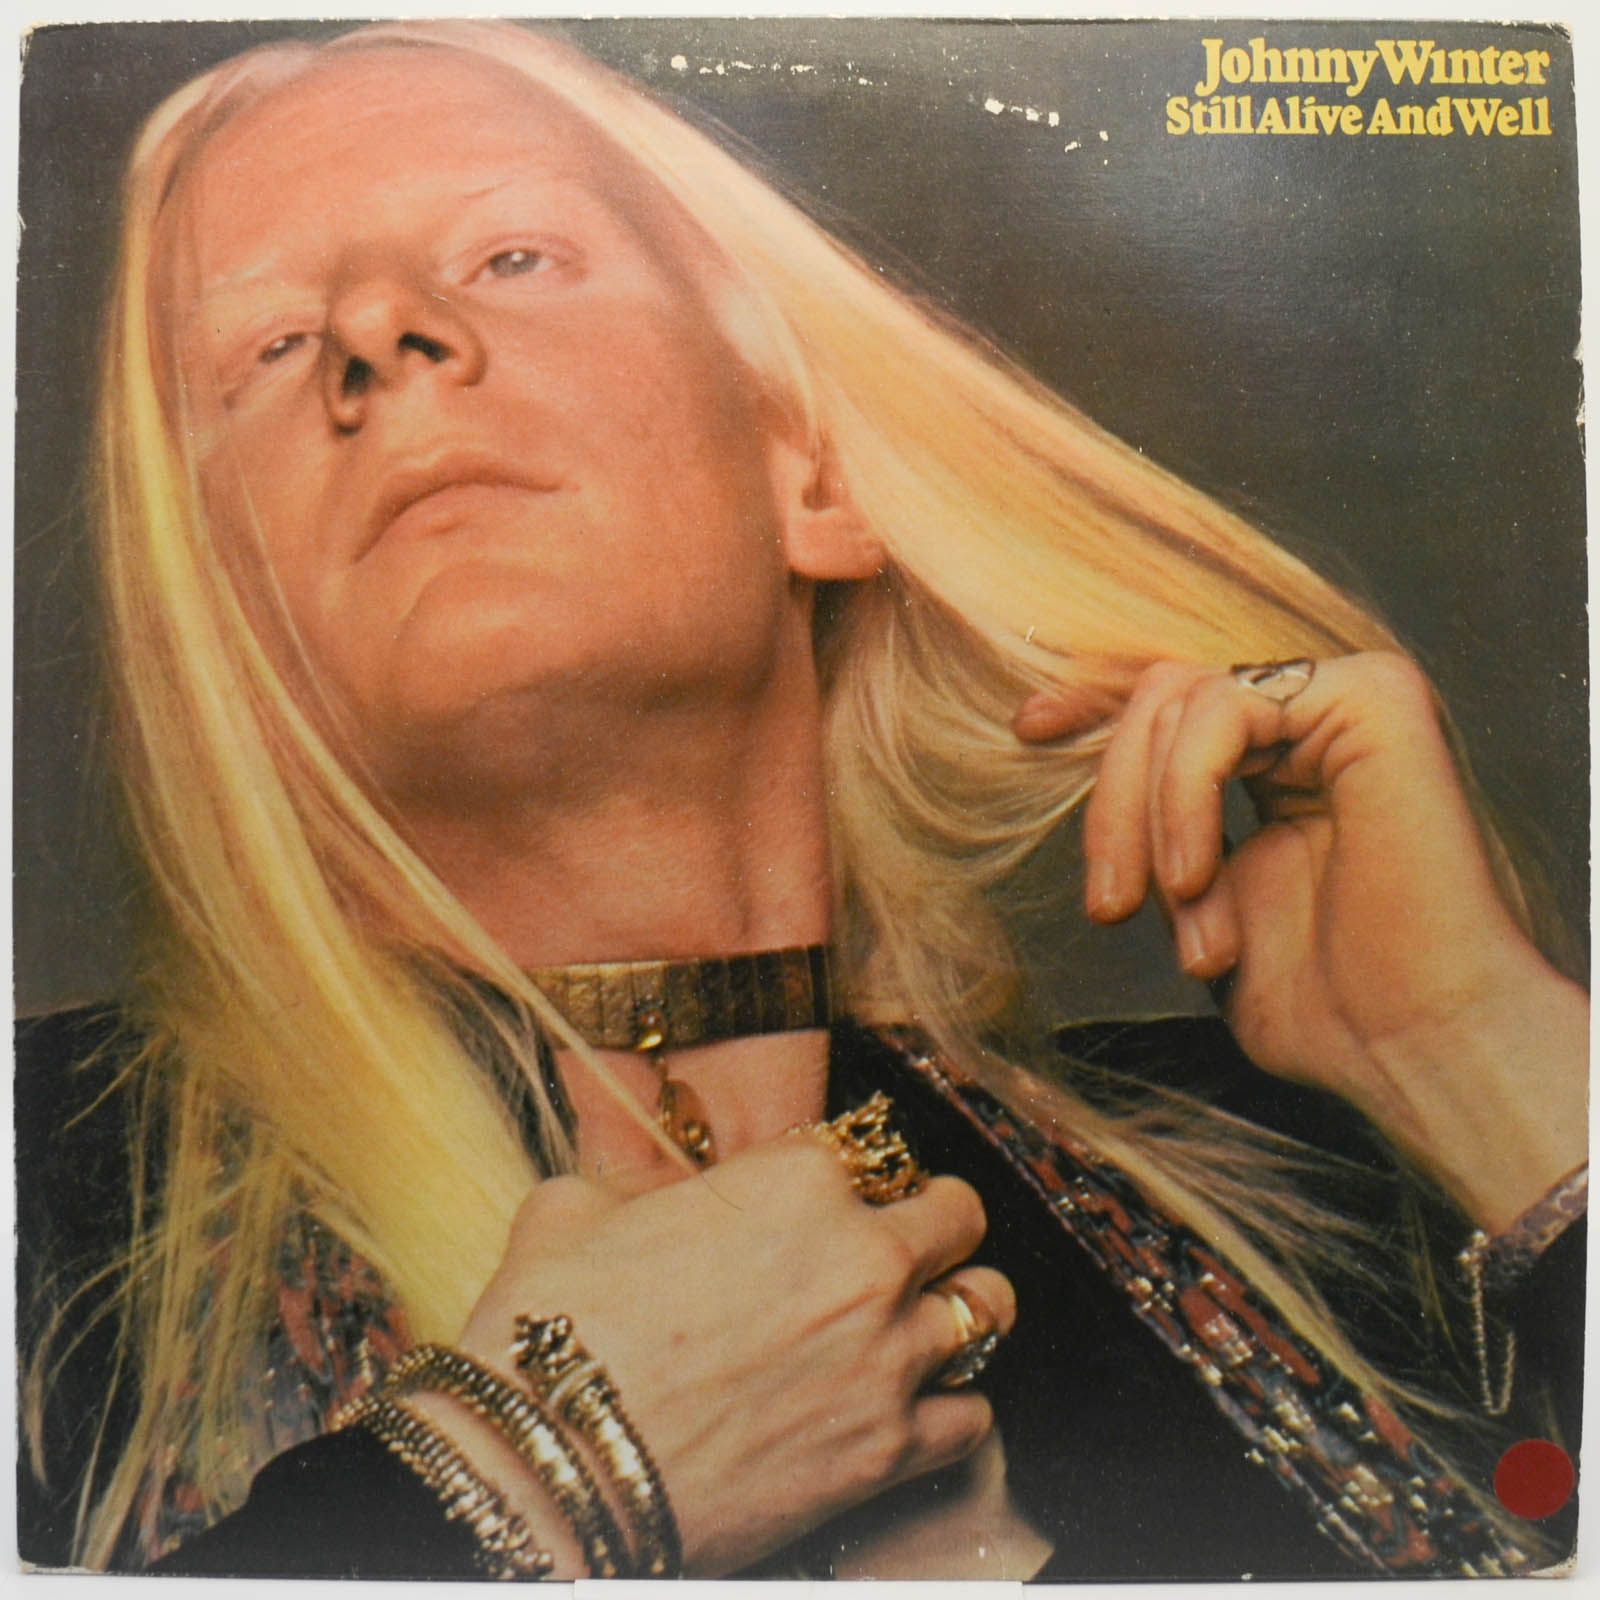 Johnny Winter — Still Alive And Well, 1973